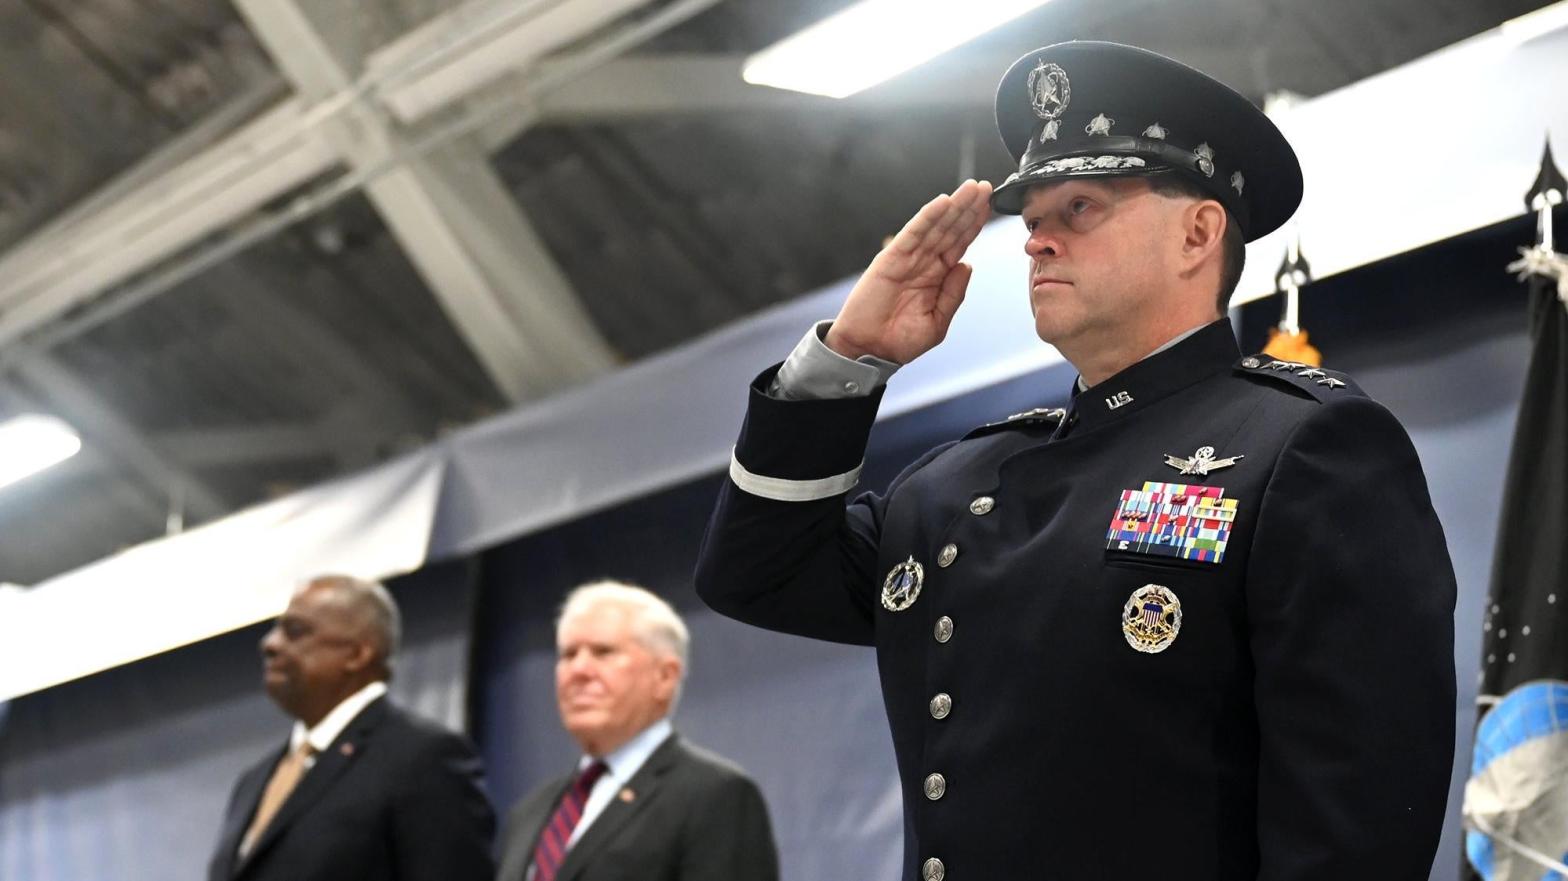 New Chief of Space Operations Bradley Chance Saltzman was officially installed at a ceremony Nov. 2 claiming he wants 'new approaches' to the nascent branch of the armed services. (Photo: Andy Morataya/U.S. Air Force)